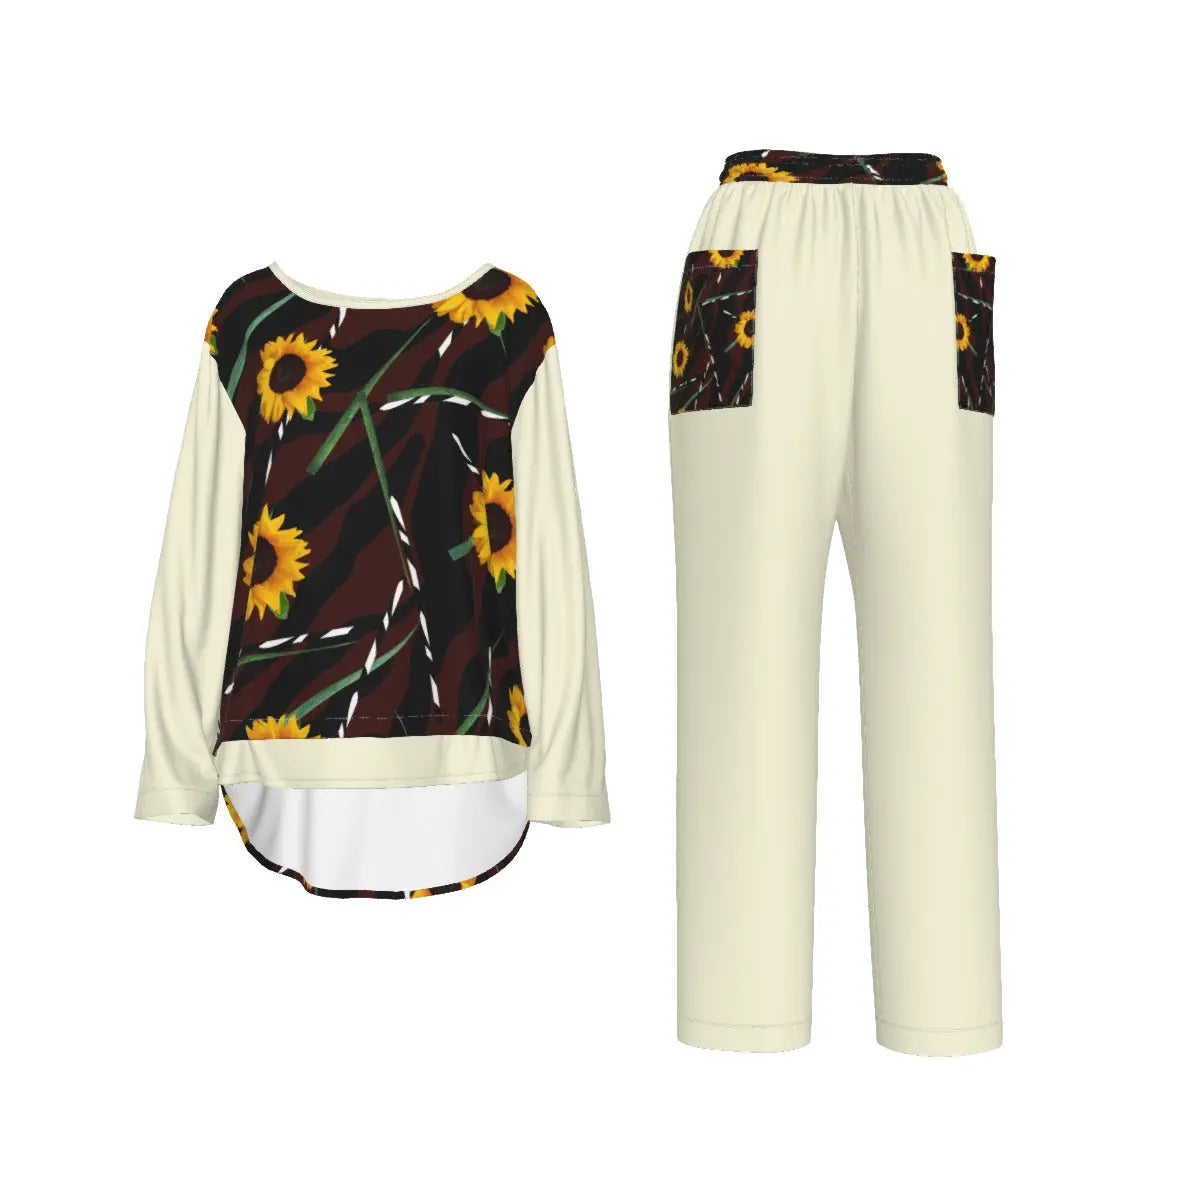 Multi-colored - Sunflower Wild Women's Curved Back Hem Outfit Set - womens pants set at TFC&H Co.